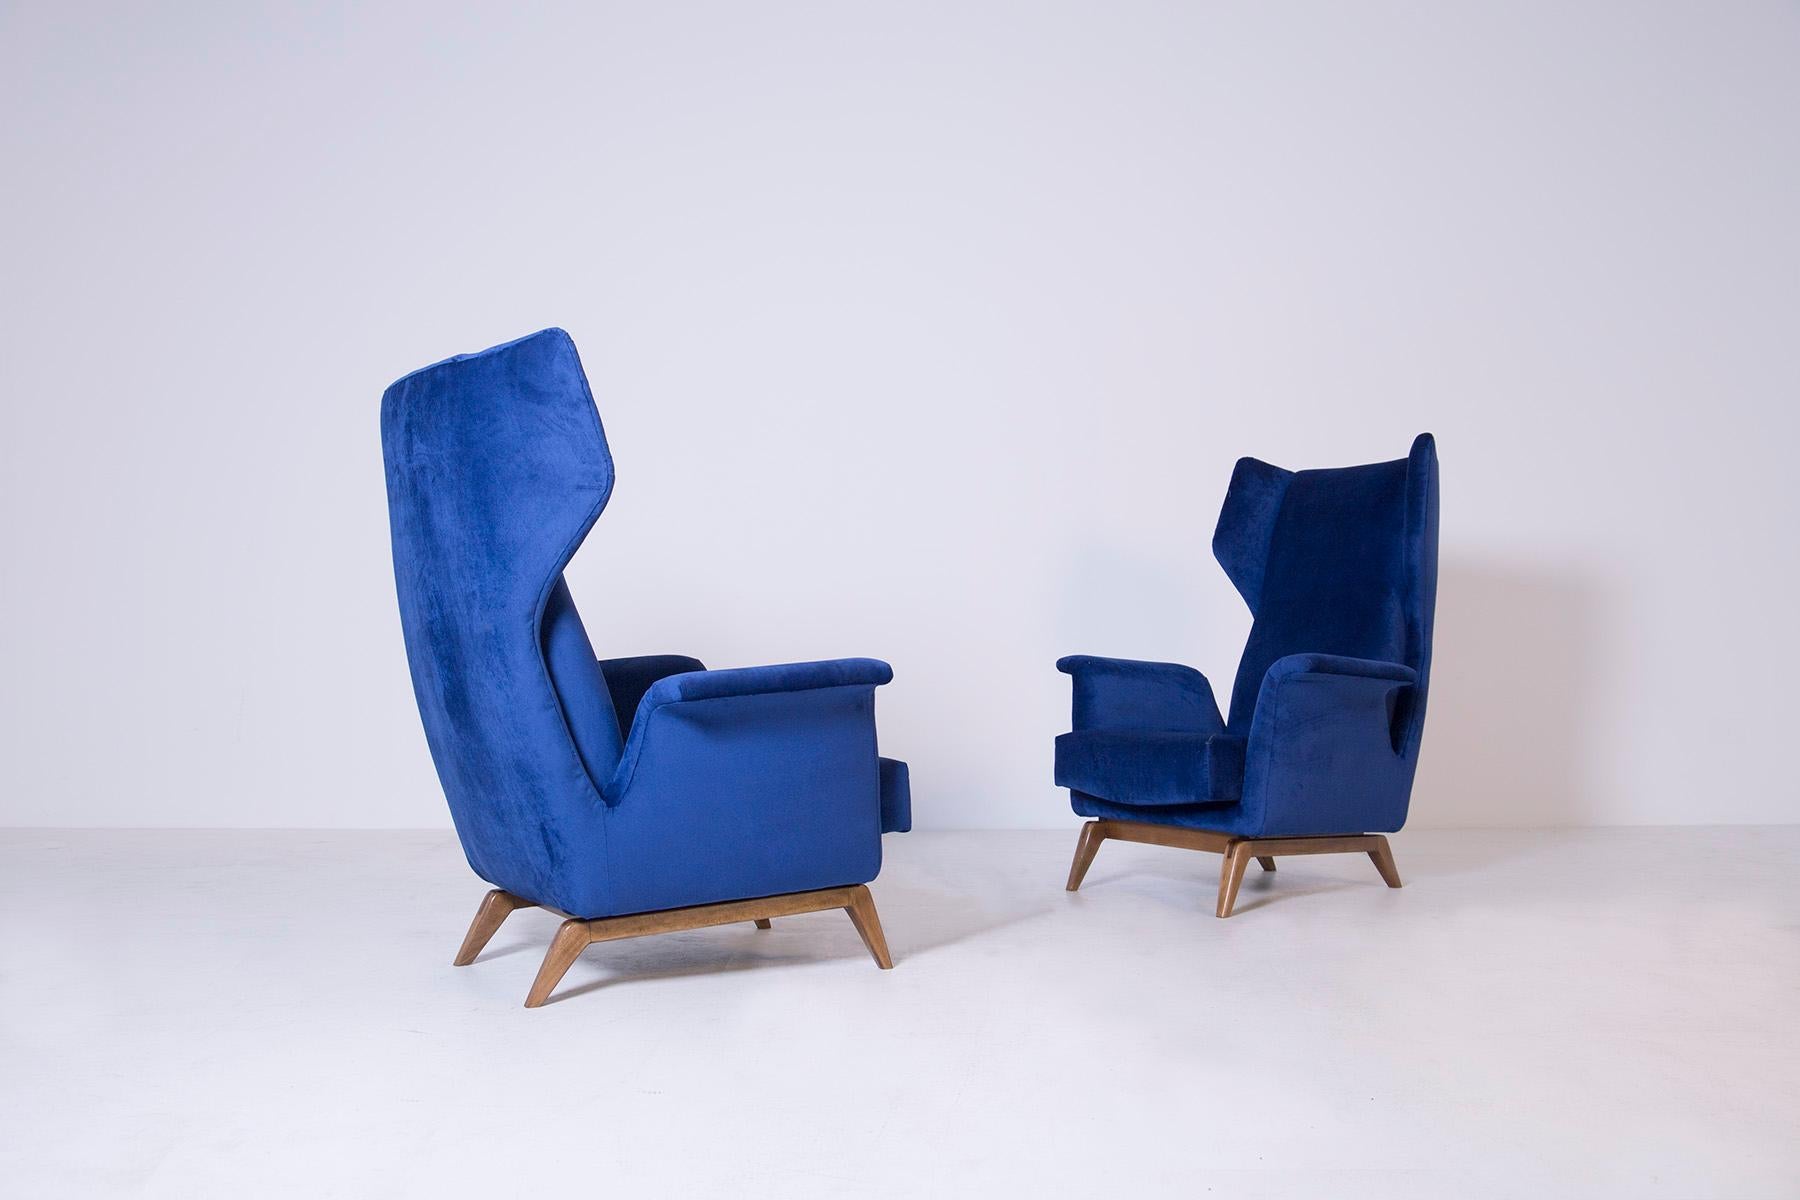 Elegant pair of armchairs from the Cassina manufacture of the 1950s. The armchairs have been restored and re-lined in blue velvet. The peculiarity of the armchairs is its wraparound back through two ears coming out of the body. Its wing shaped